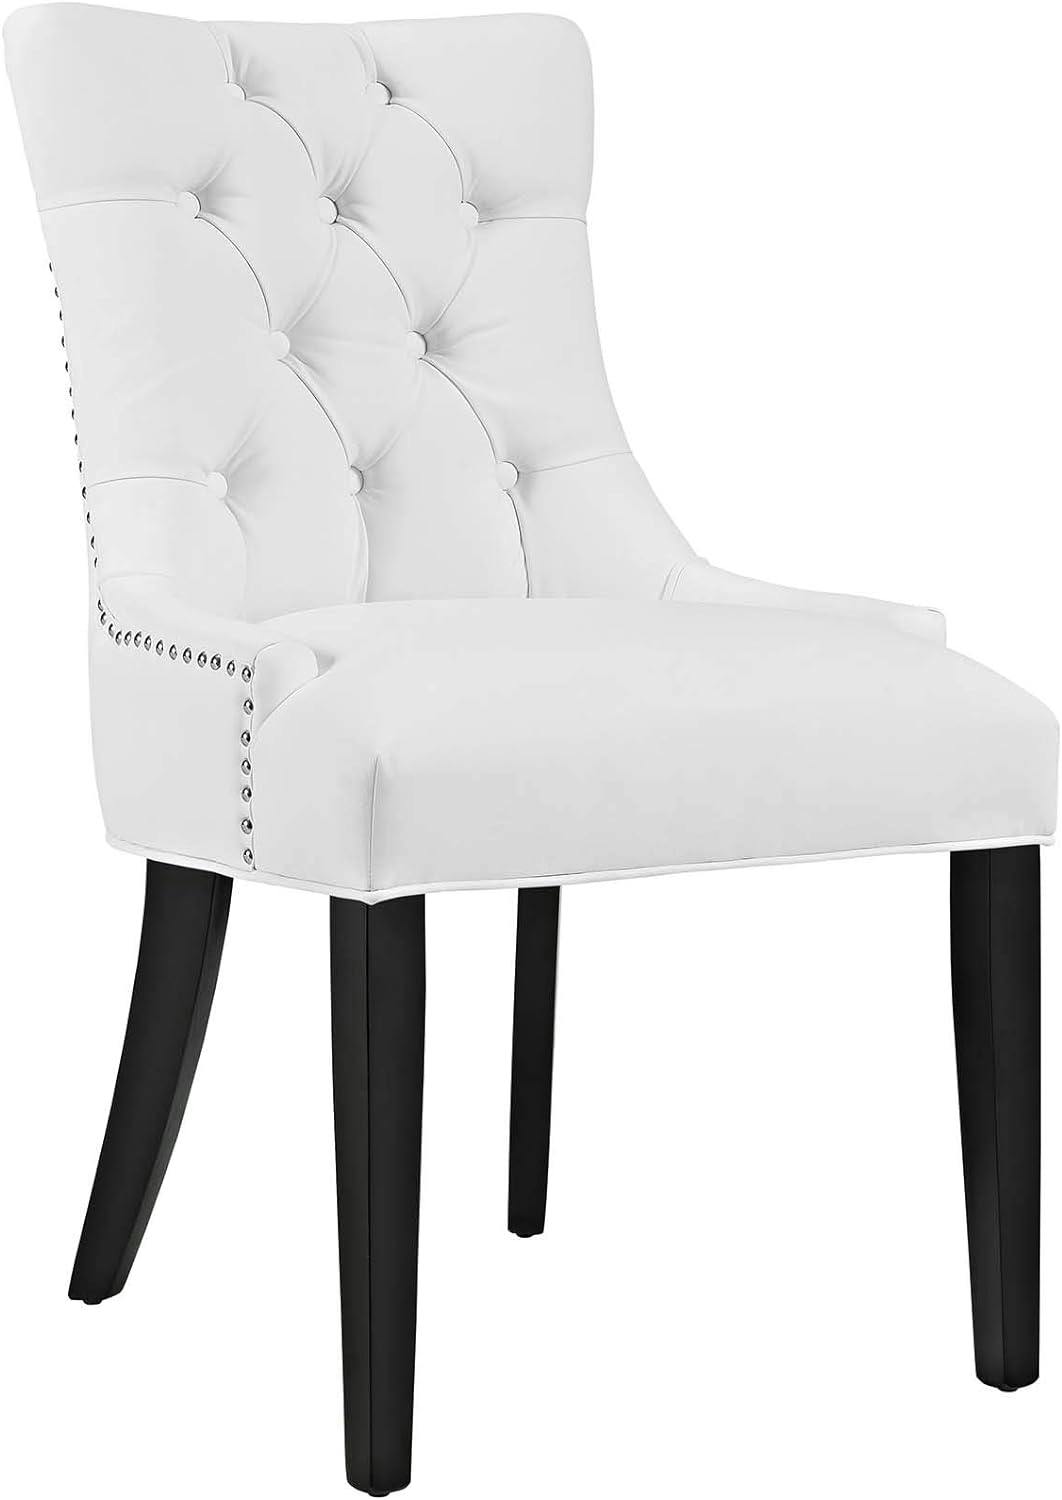 Regal White Tufted Leatherette Side Chair with Nailhead Trim